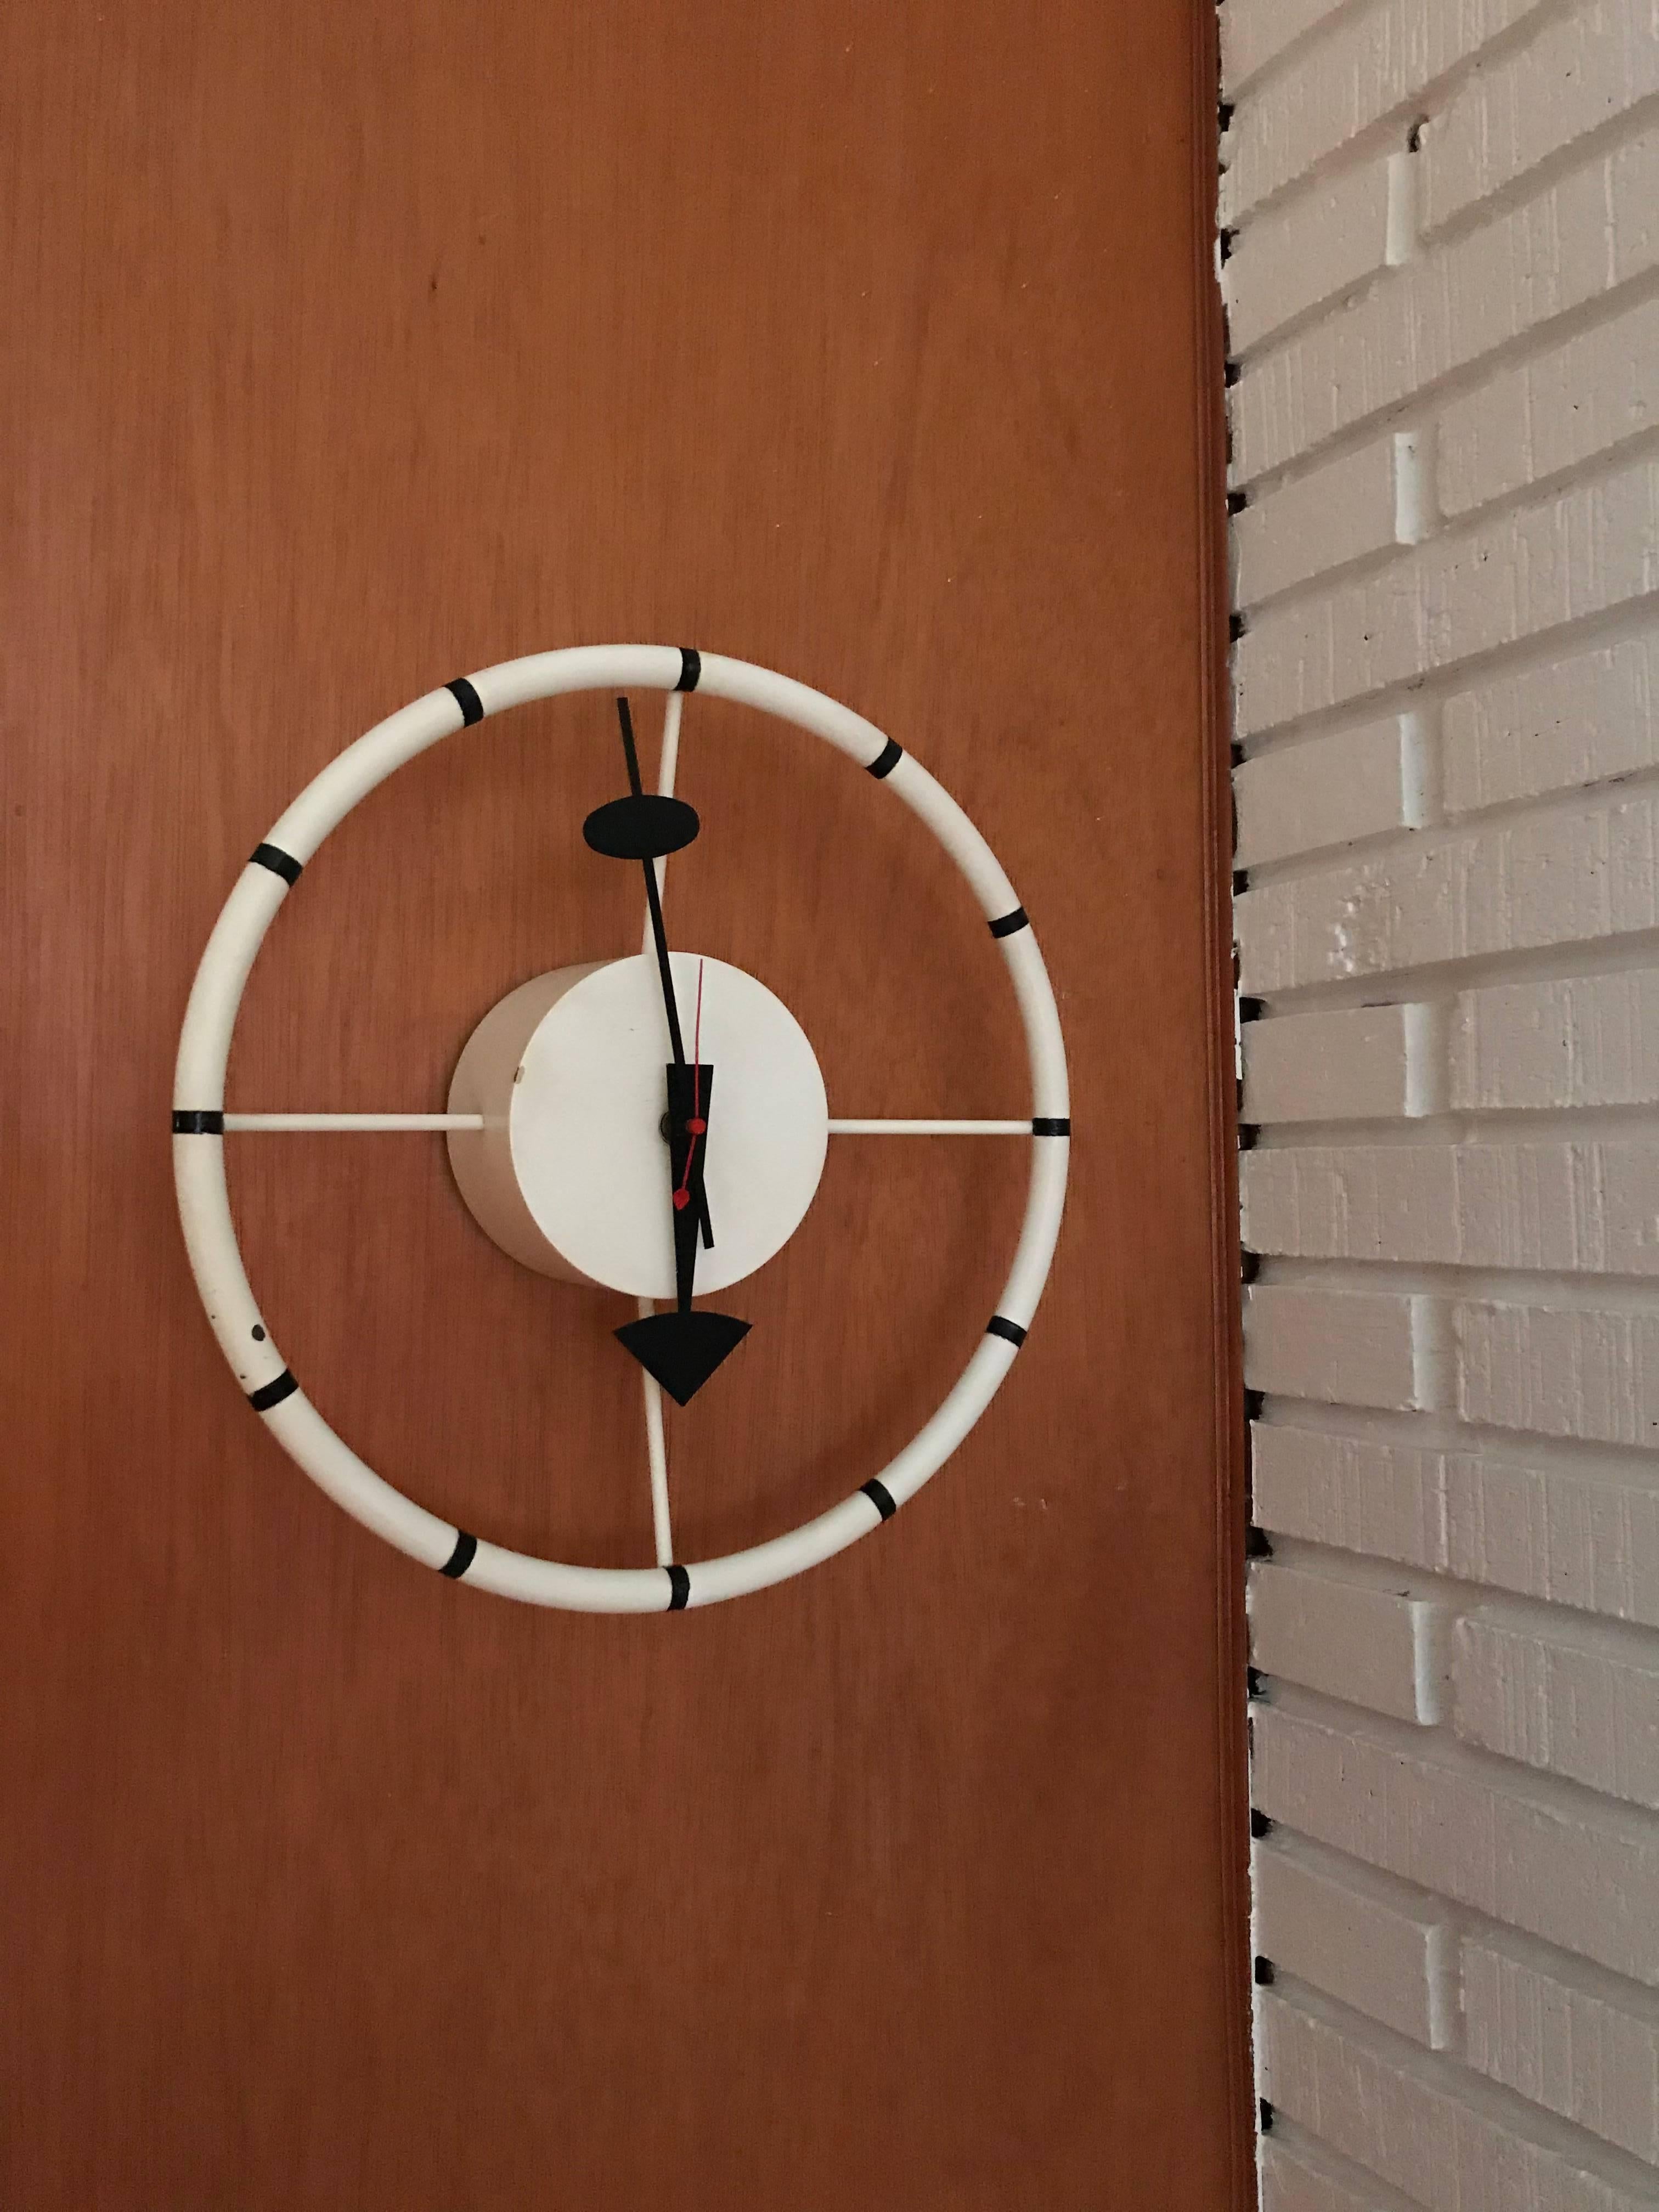 20th Century Steering Wheel Wall Clock by George Nelson for Howard Miller